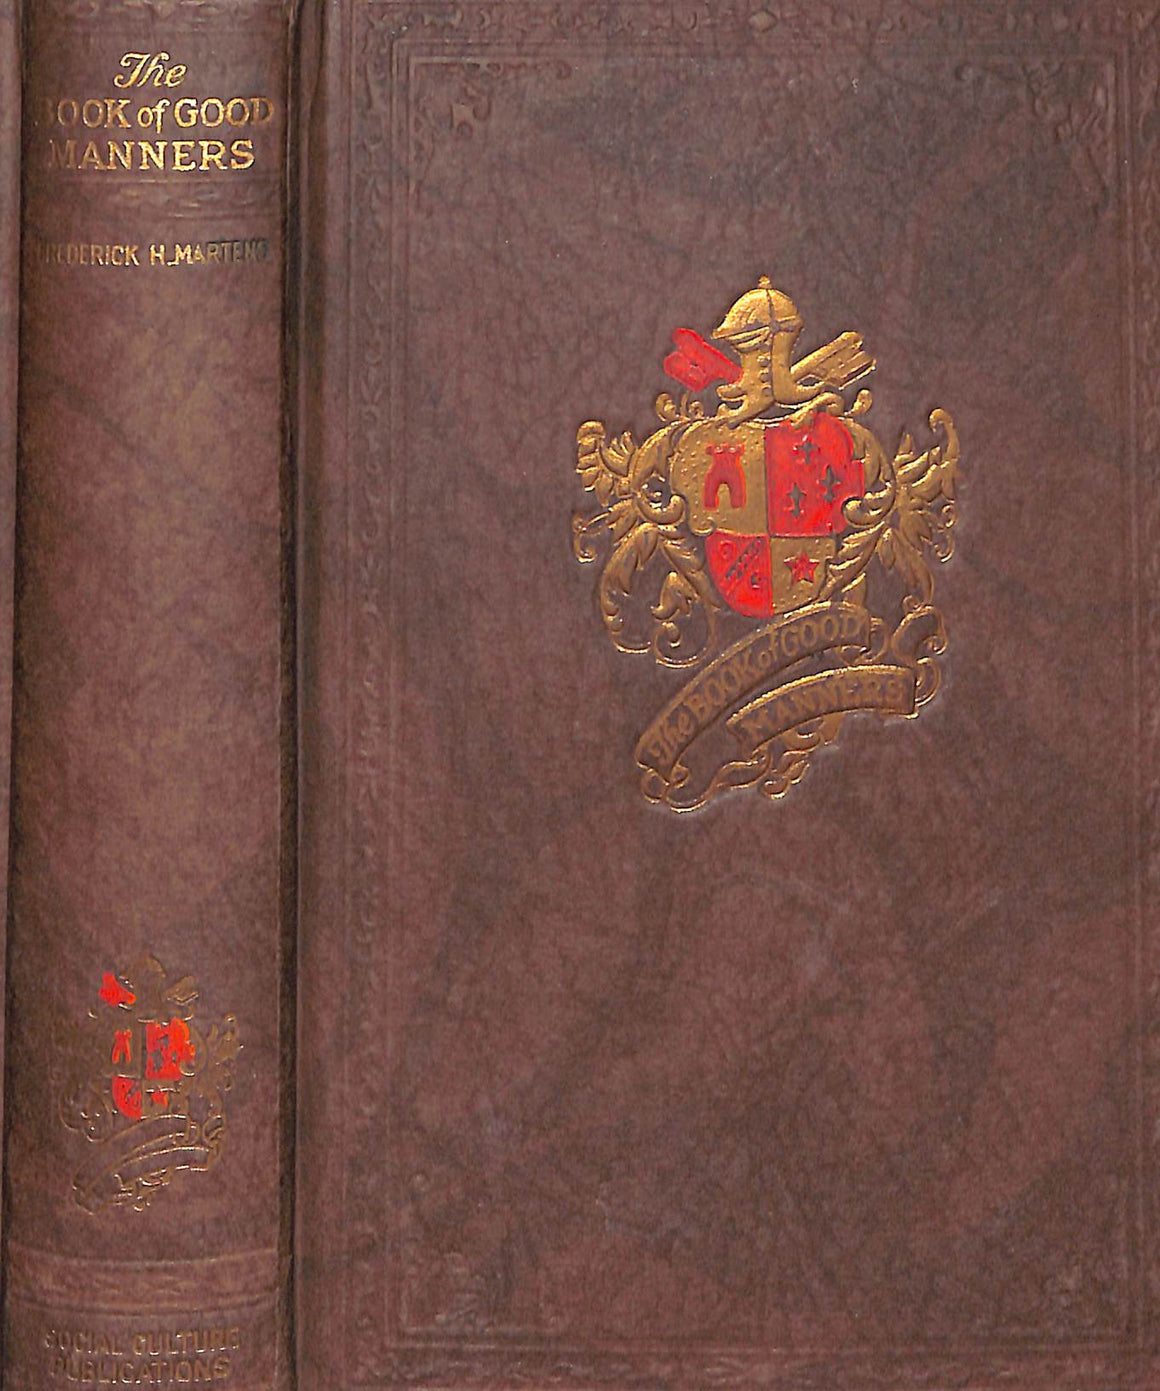 "The Book Of Good Manners: A Guide To Polite Usage For All Social Functions" 1923 MARTENS, Frederick H.